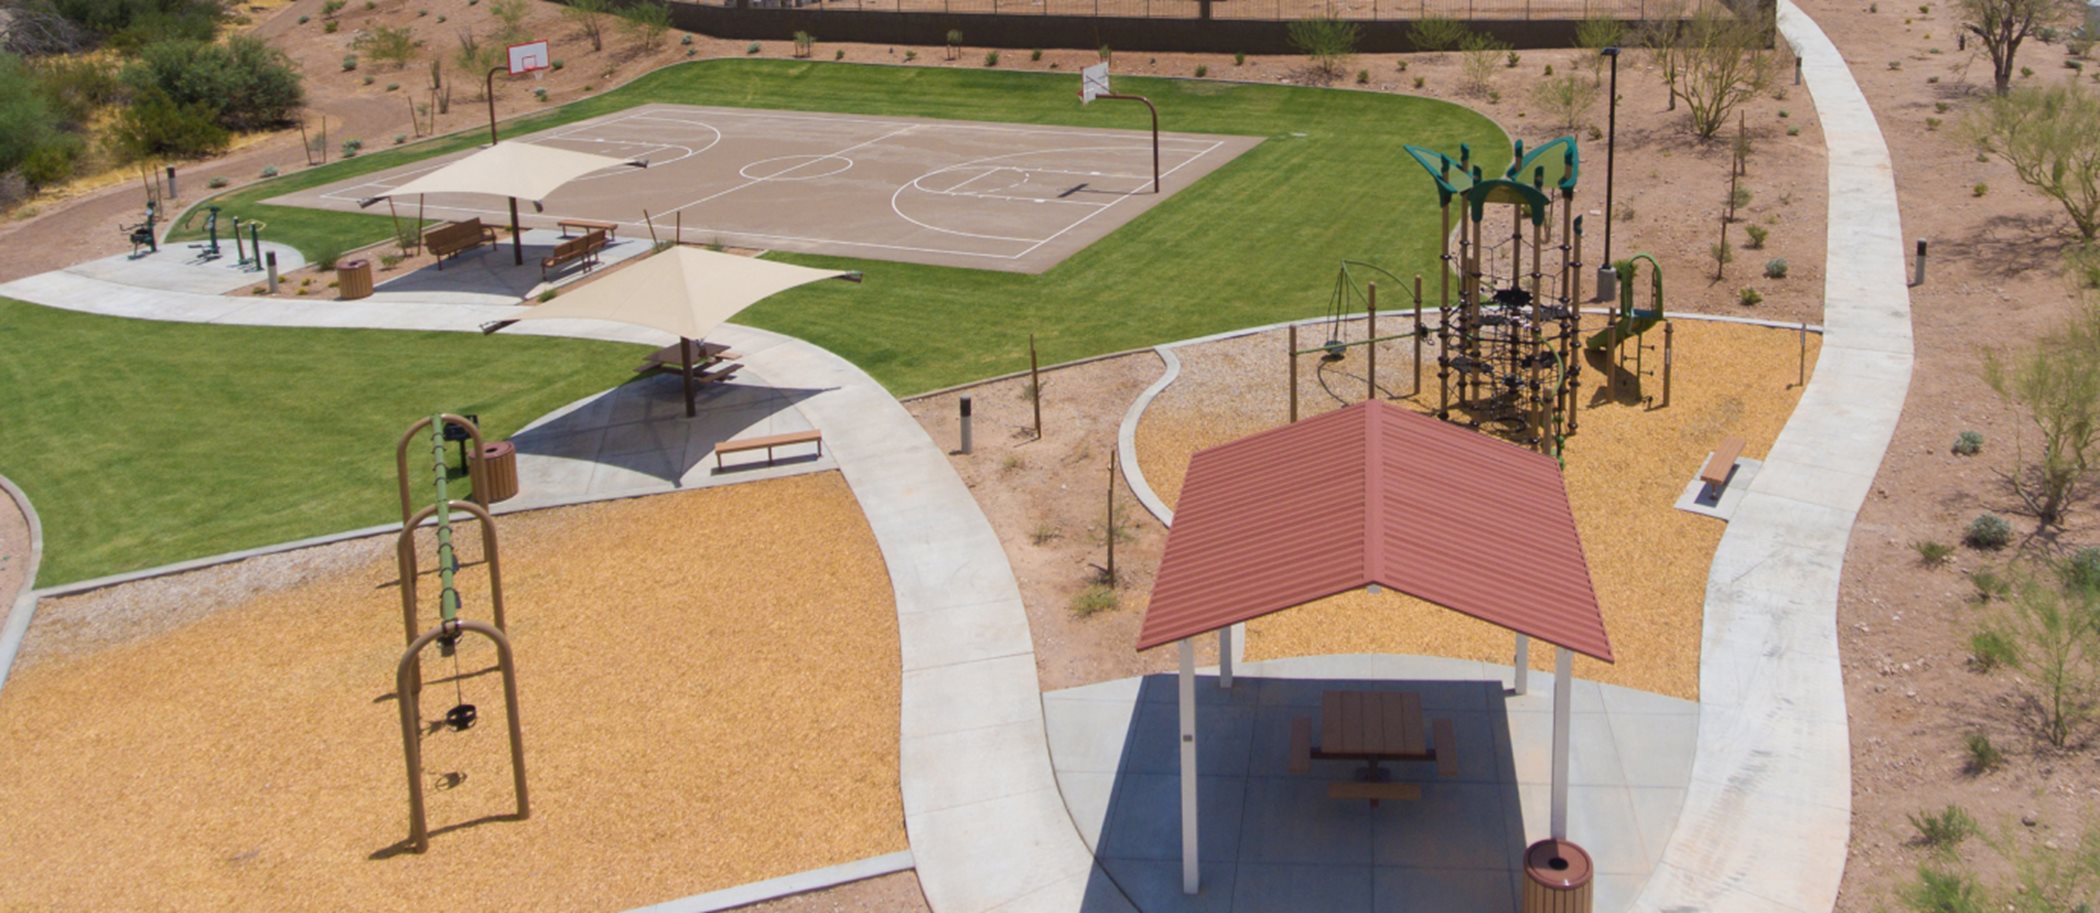 Aerial of playground and basketball court